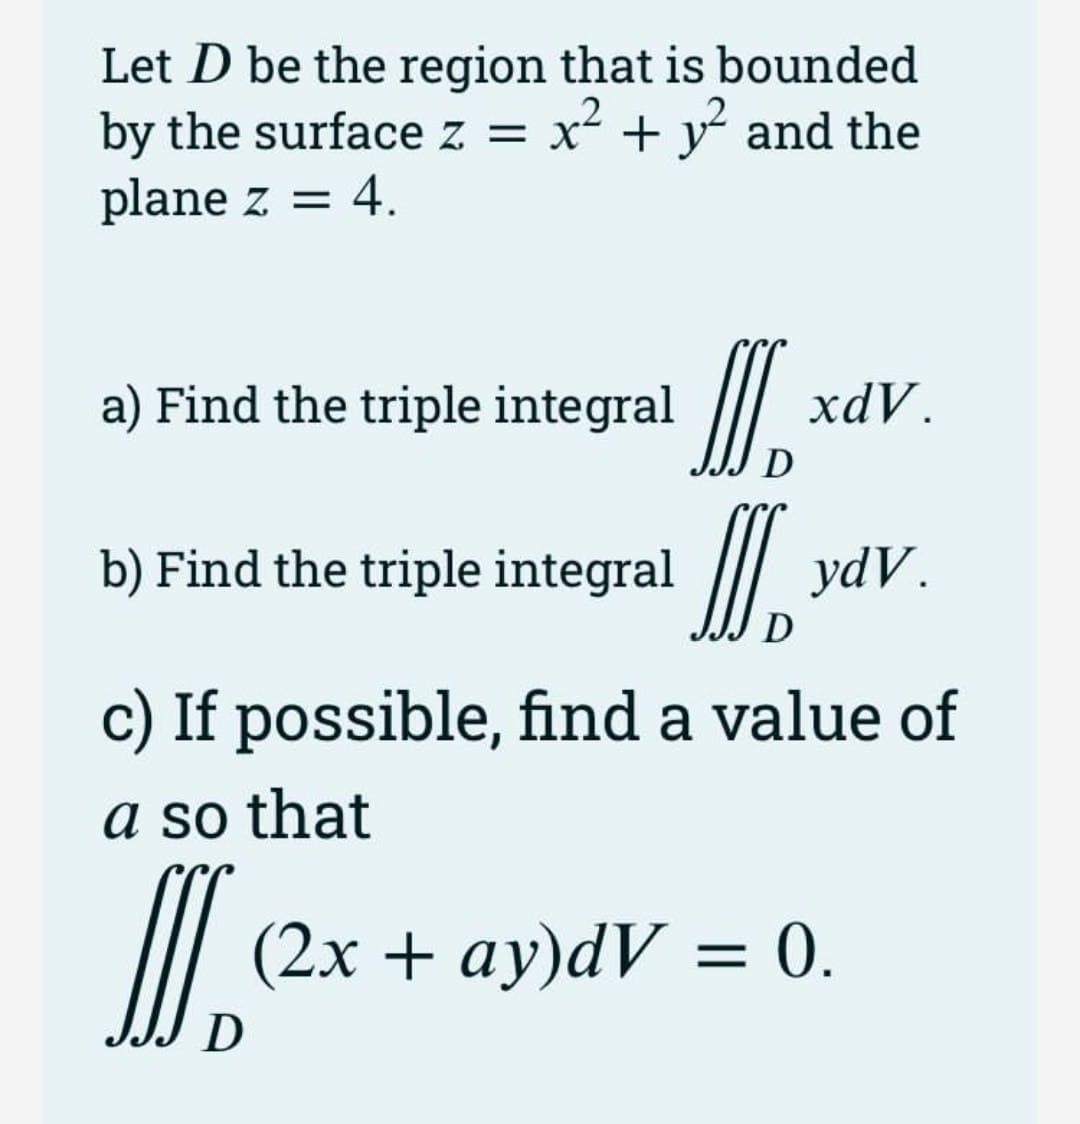 Let D be the region that is bounded
by the surface z =
x² + y and the
plane z = 4.
I.
I.
a) Find the triple integral
xdV.
b) Find the triple integral
ydV.
D
c) If possible, find a value of
a so that
(2х + аy)dV - 0.
D
